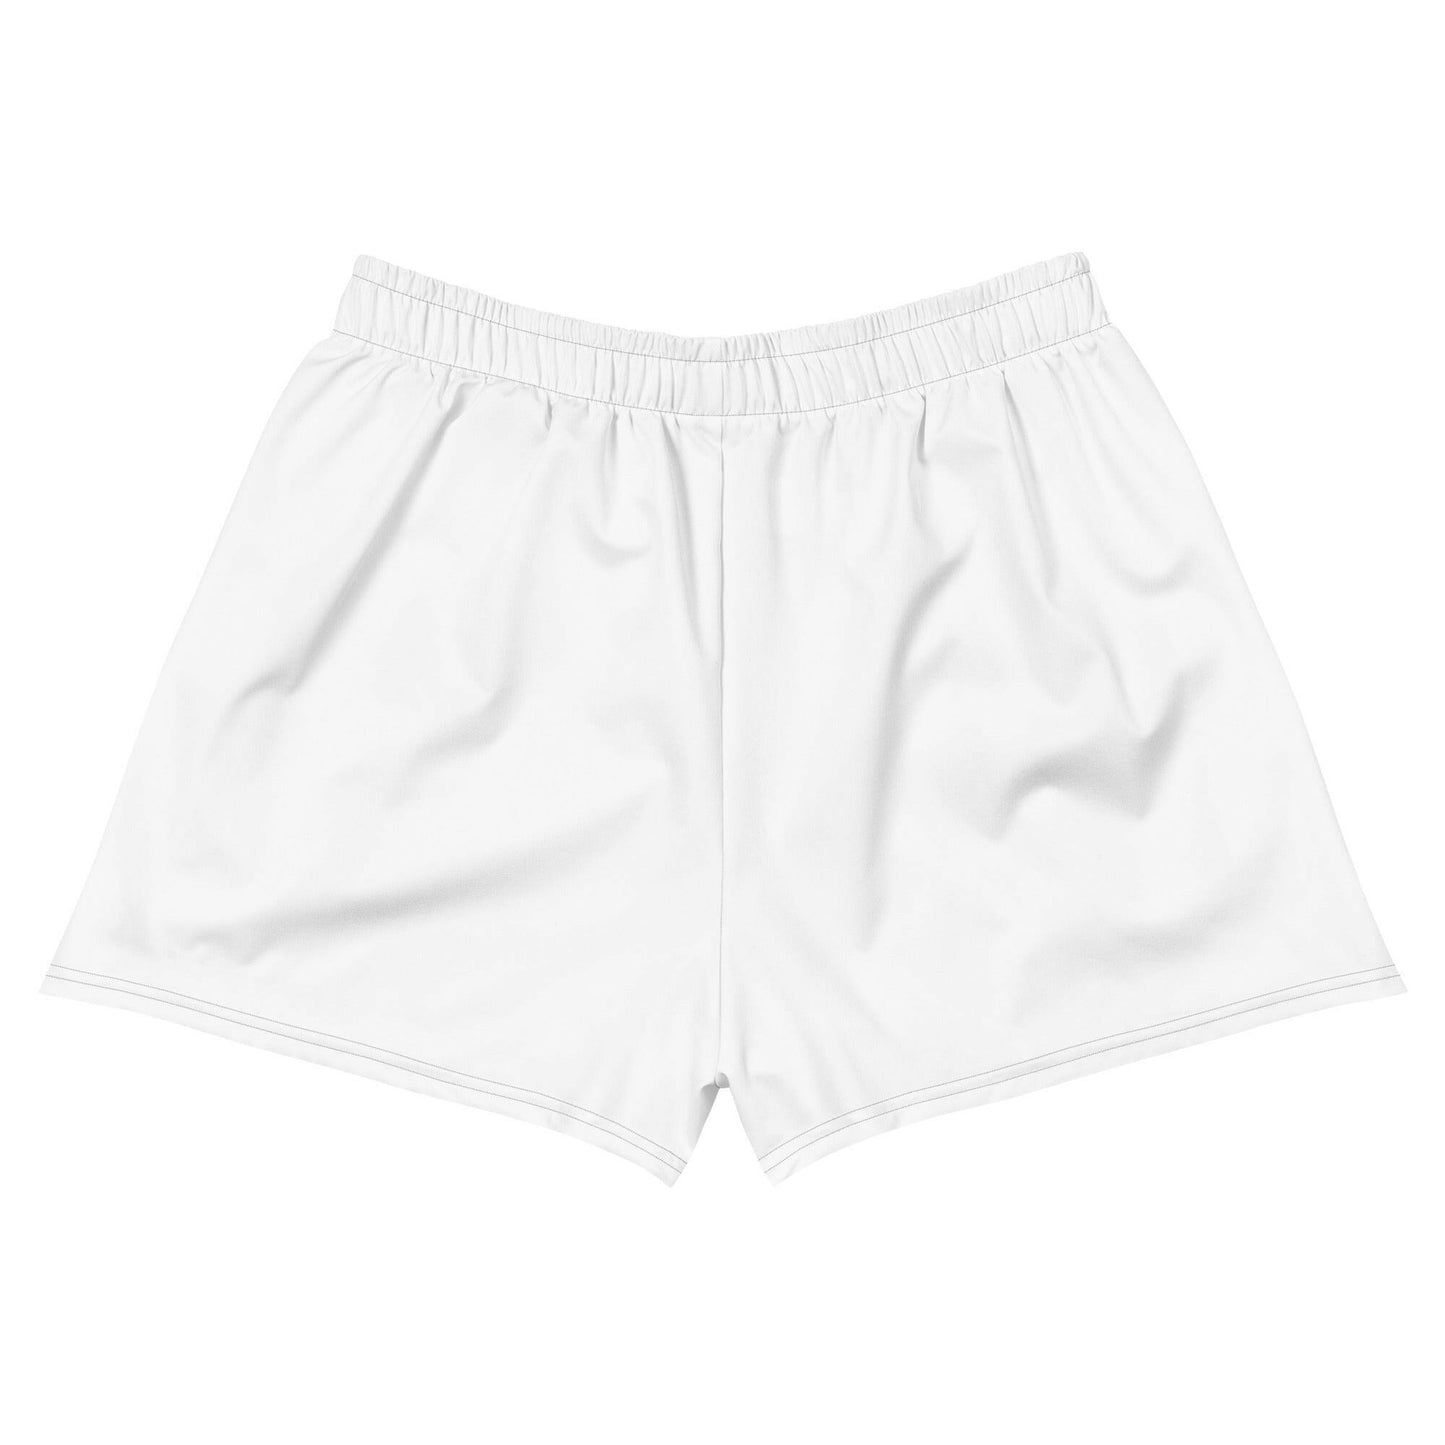 Thin Crucifix Women’s Recycled Athletic Shorts